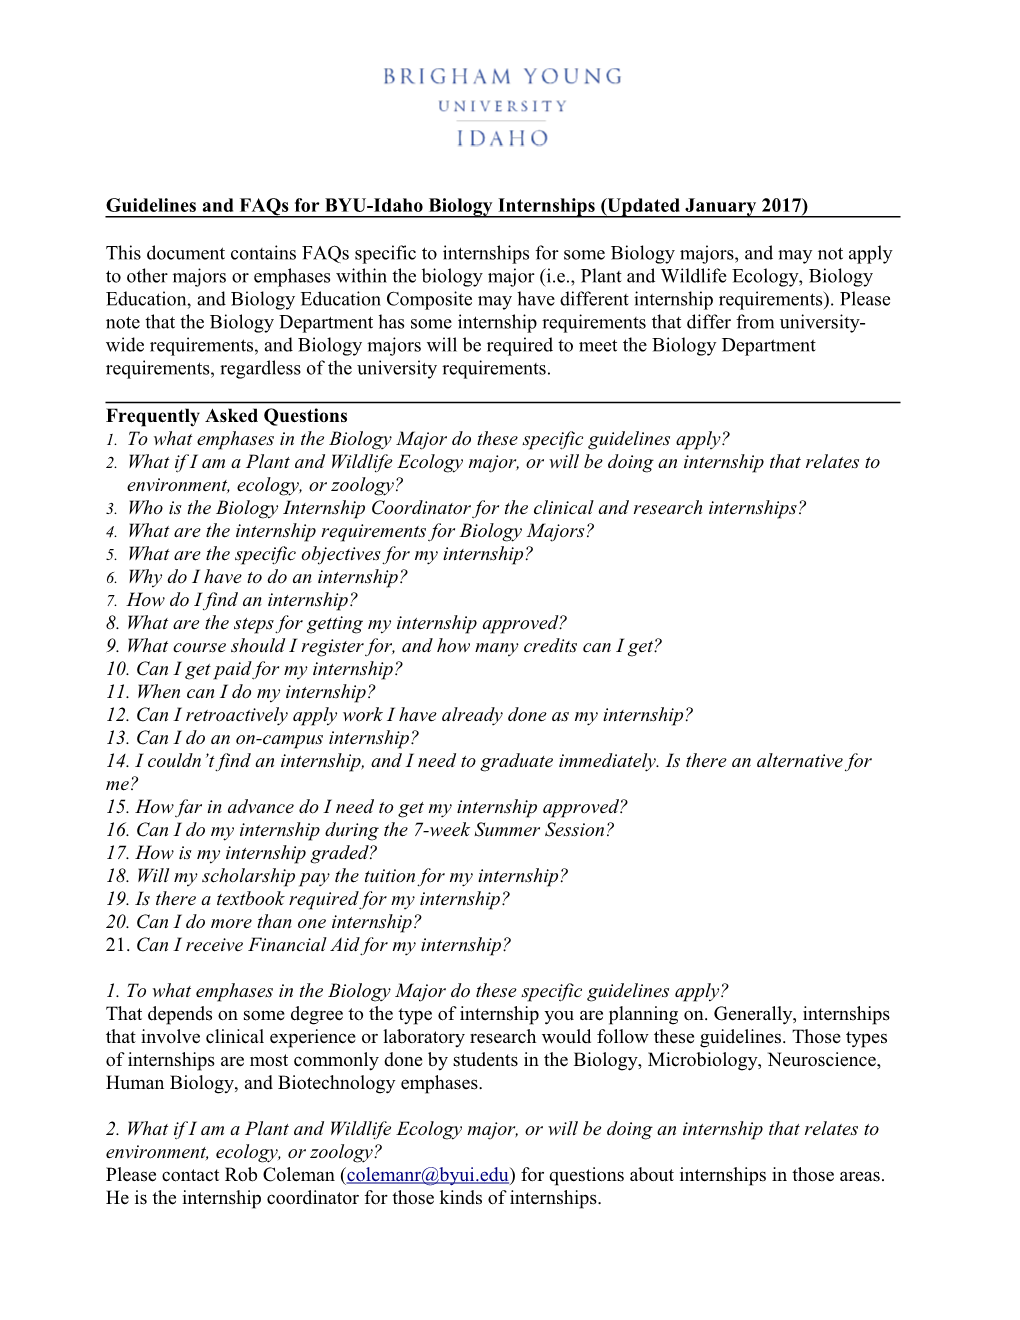 Guidelines and Faqs for BYU-Idaho Biology Internships (Updated January 2017)